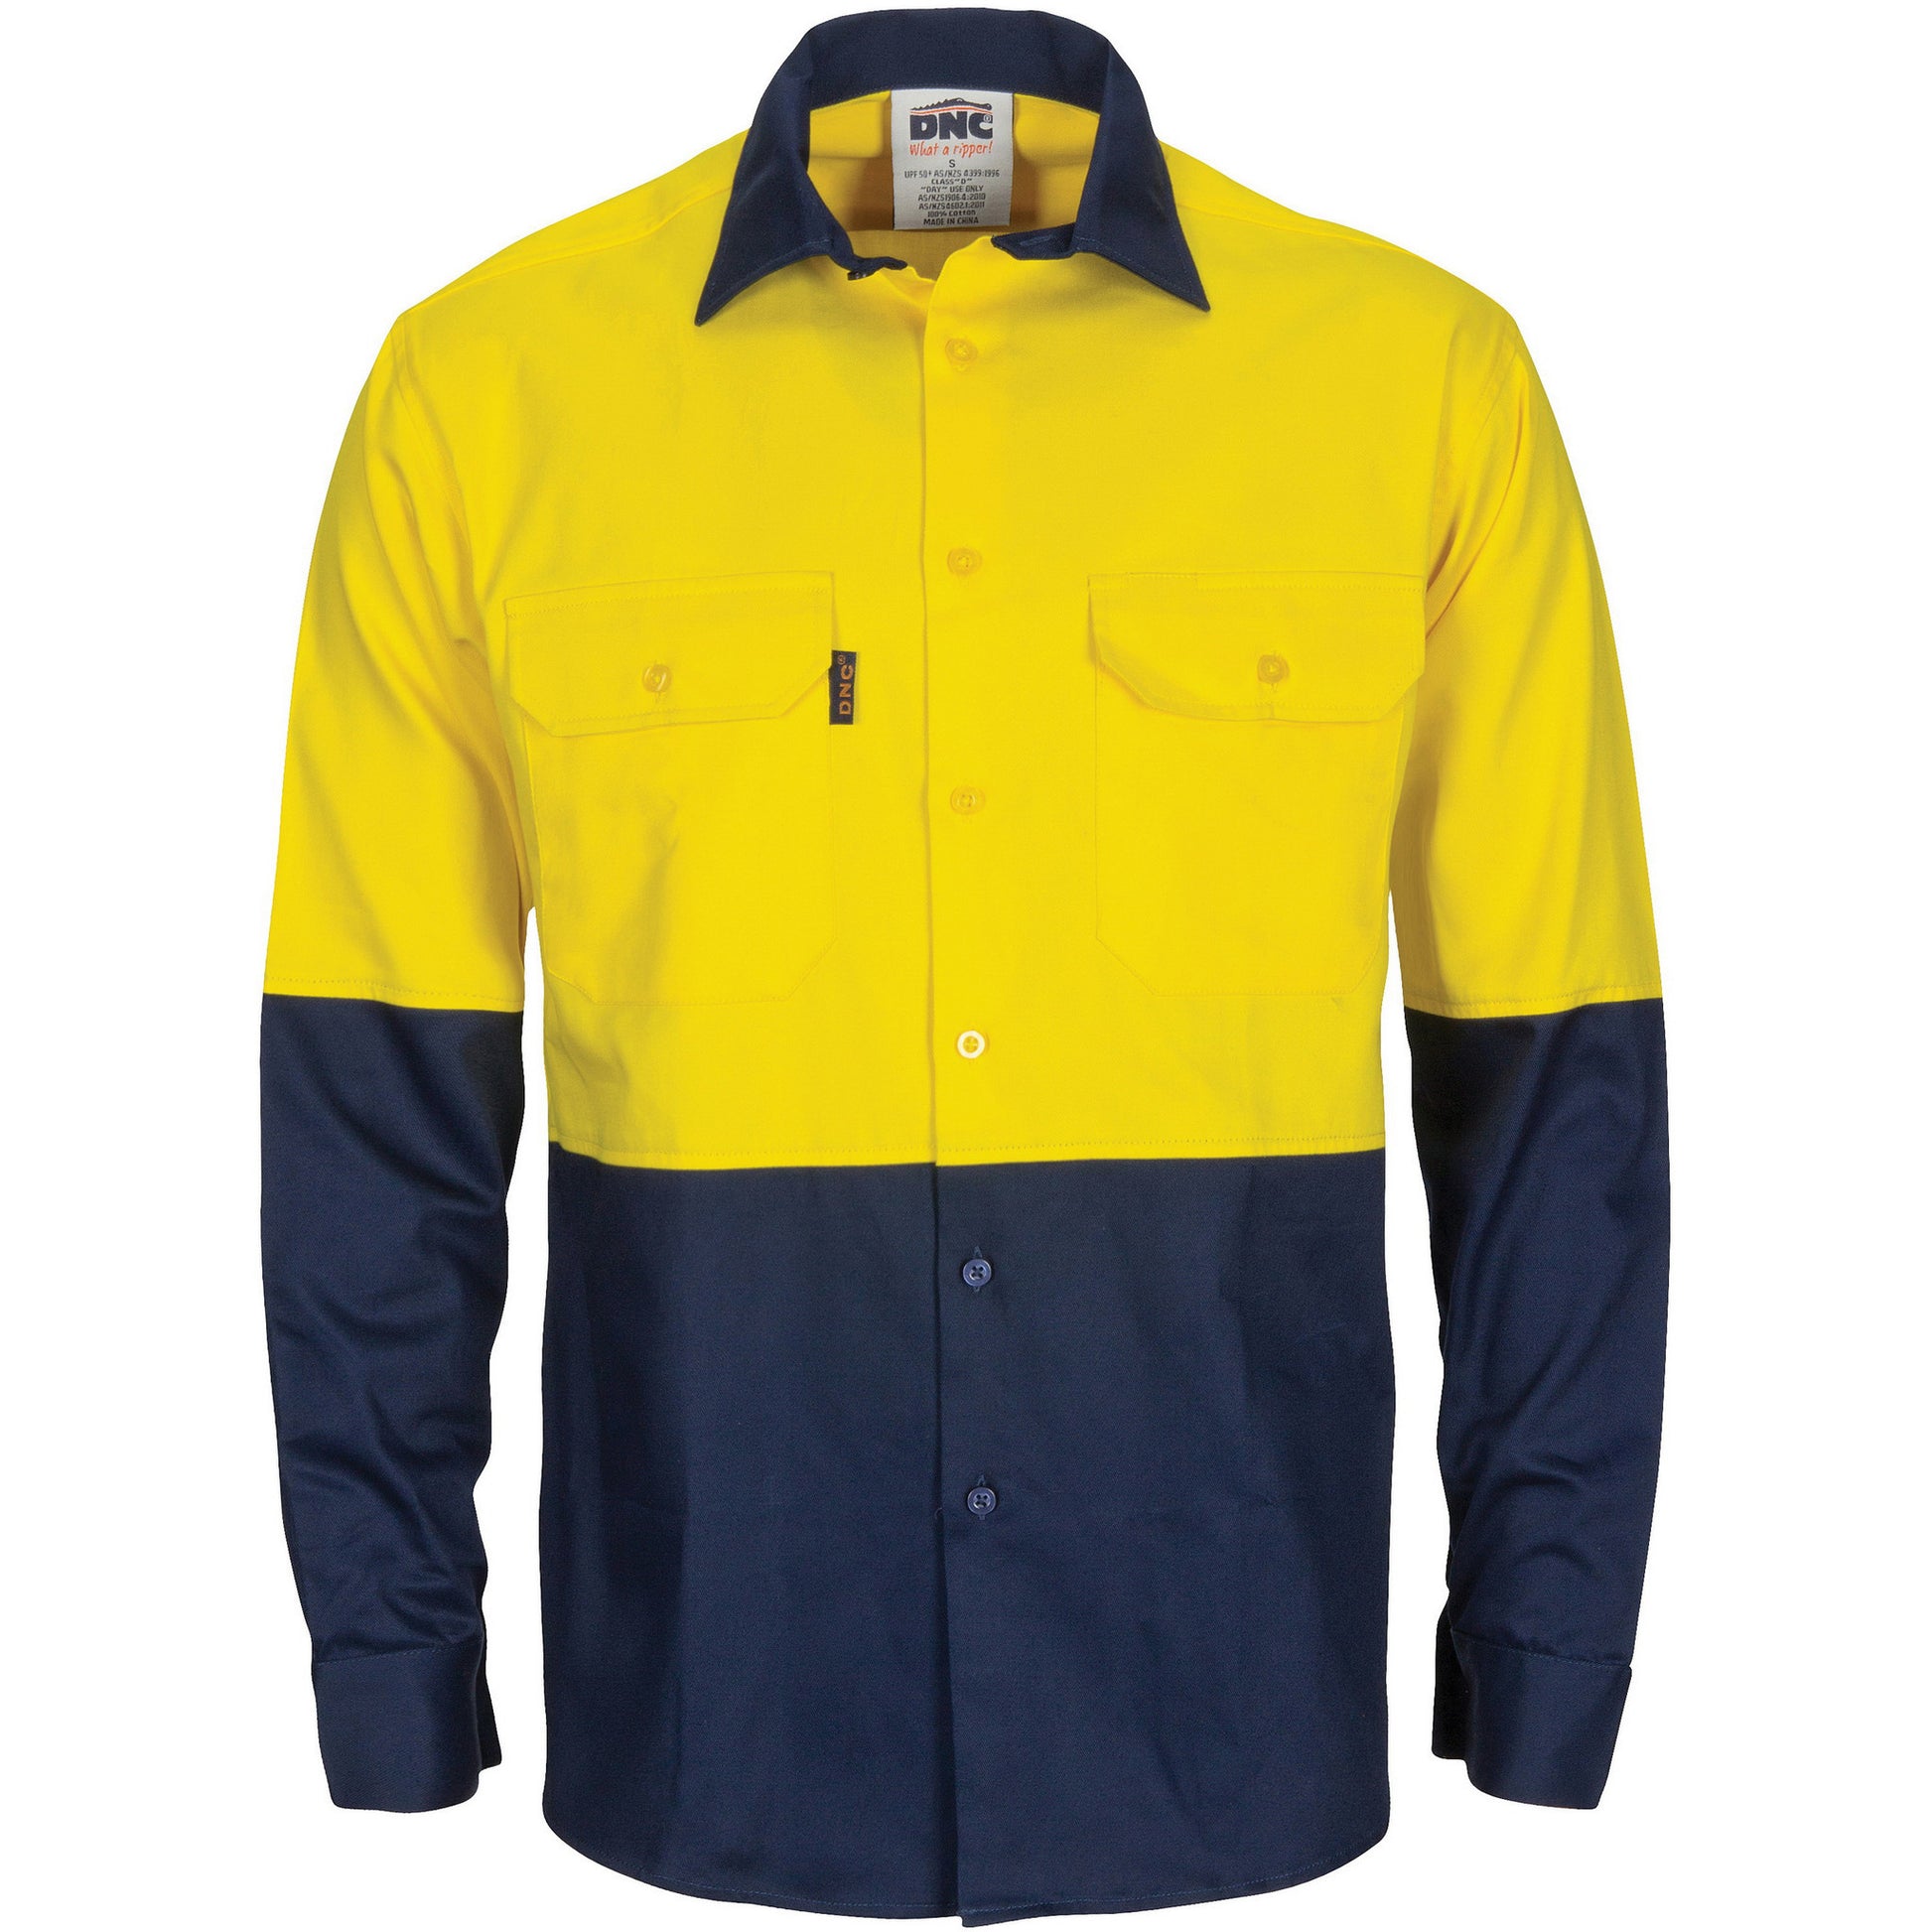 DNC HiVis L/W Cool-Breeze T2 Vertical Vented Cotton Shirt with Gusset Sleeves - L/S (3733)